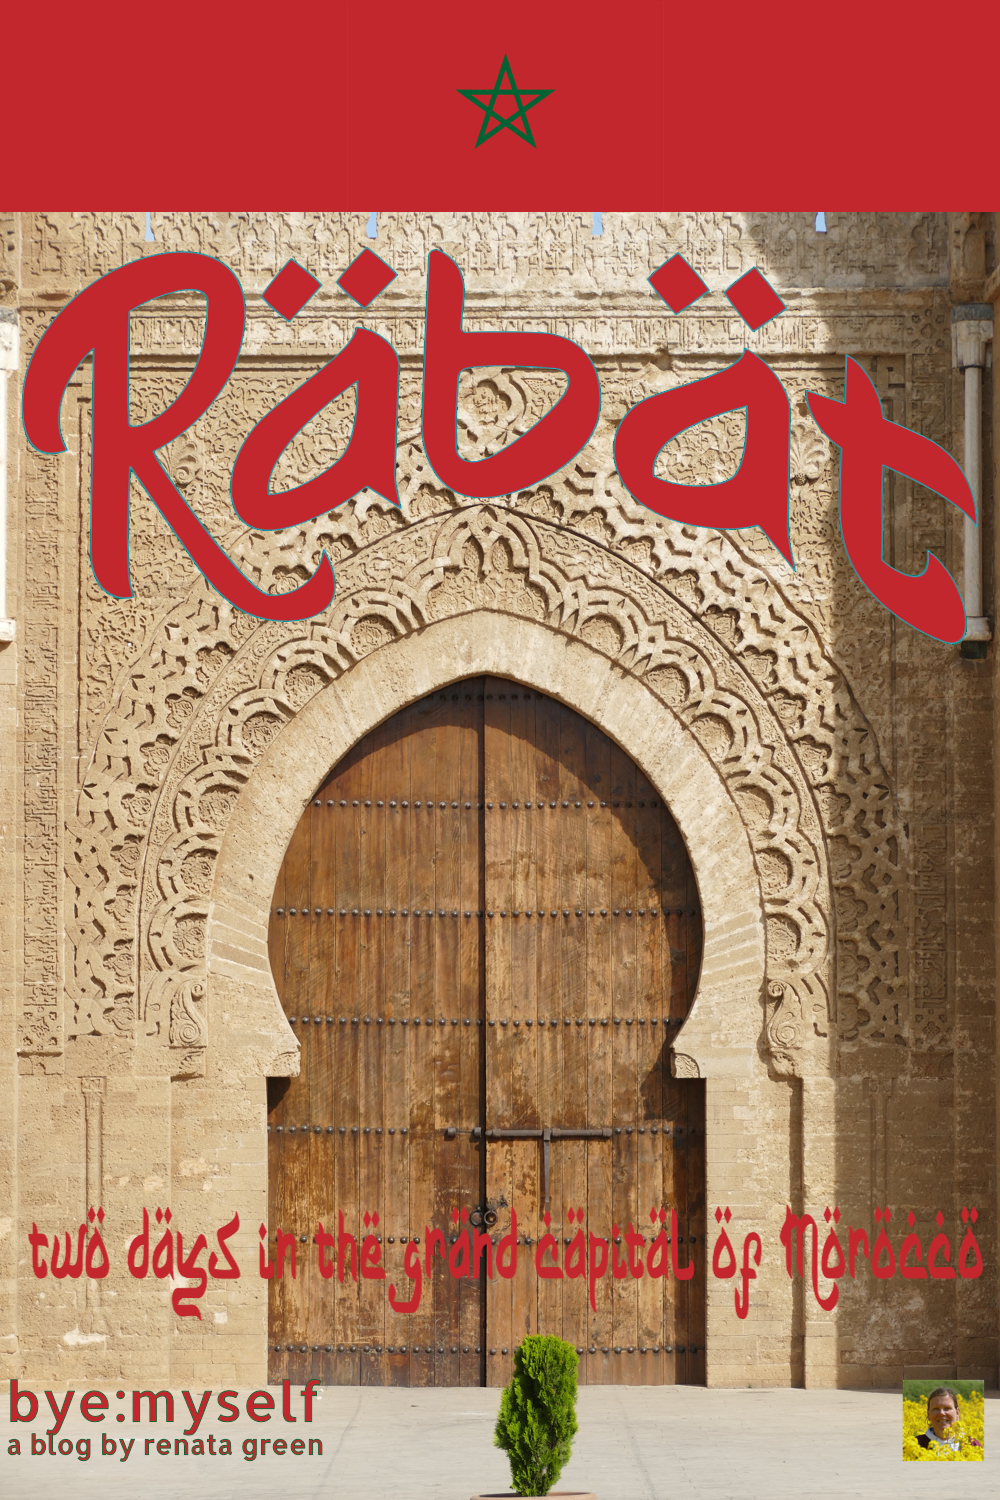 Pinnable Picture for the Post on RABAT - two days in the grand capital of Morocco